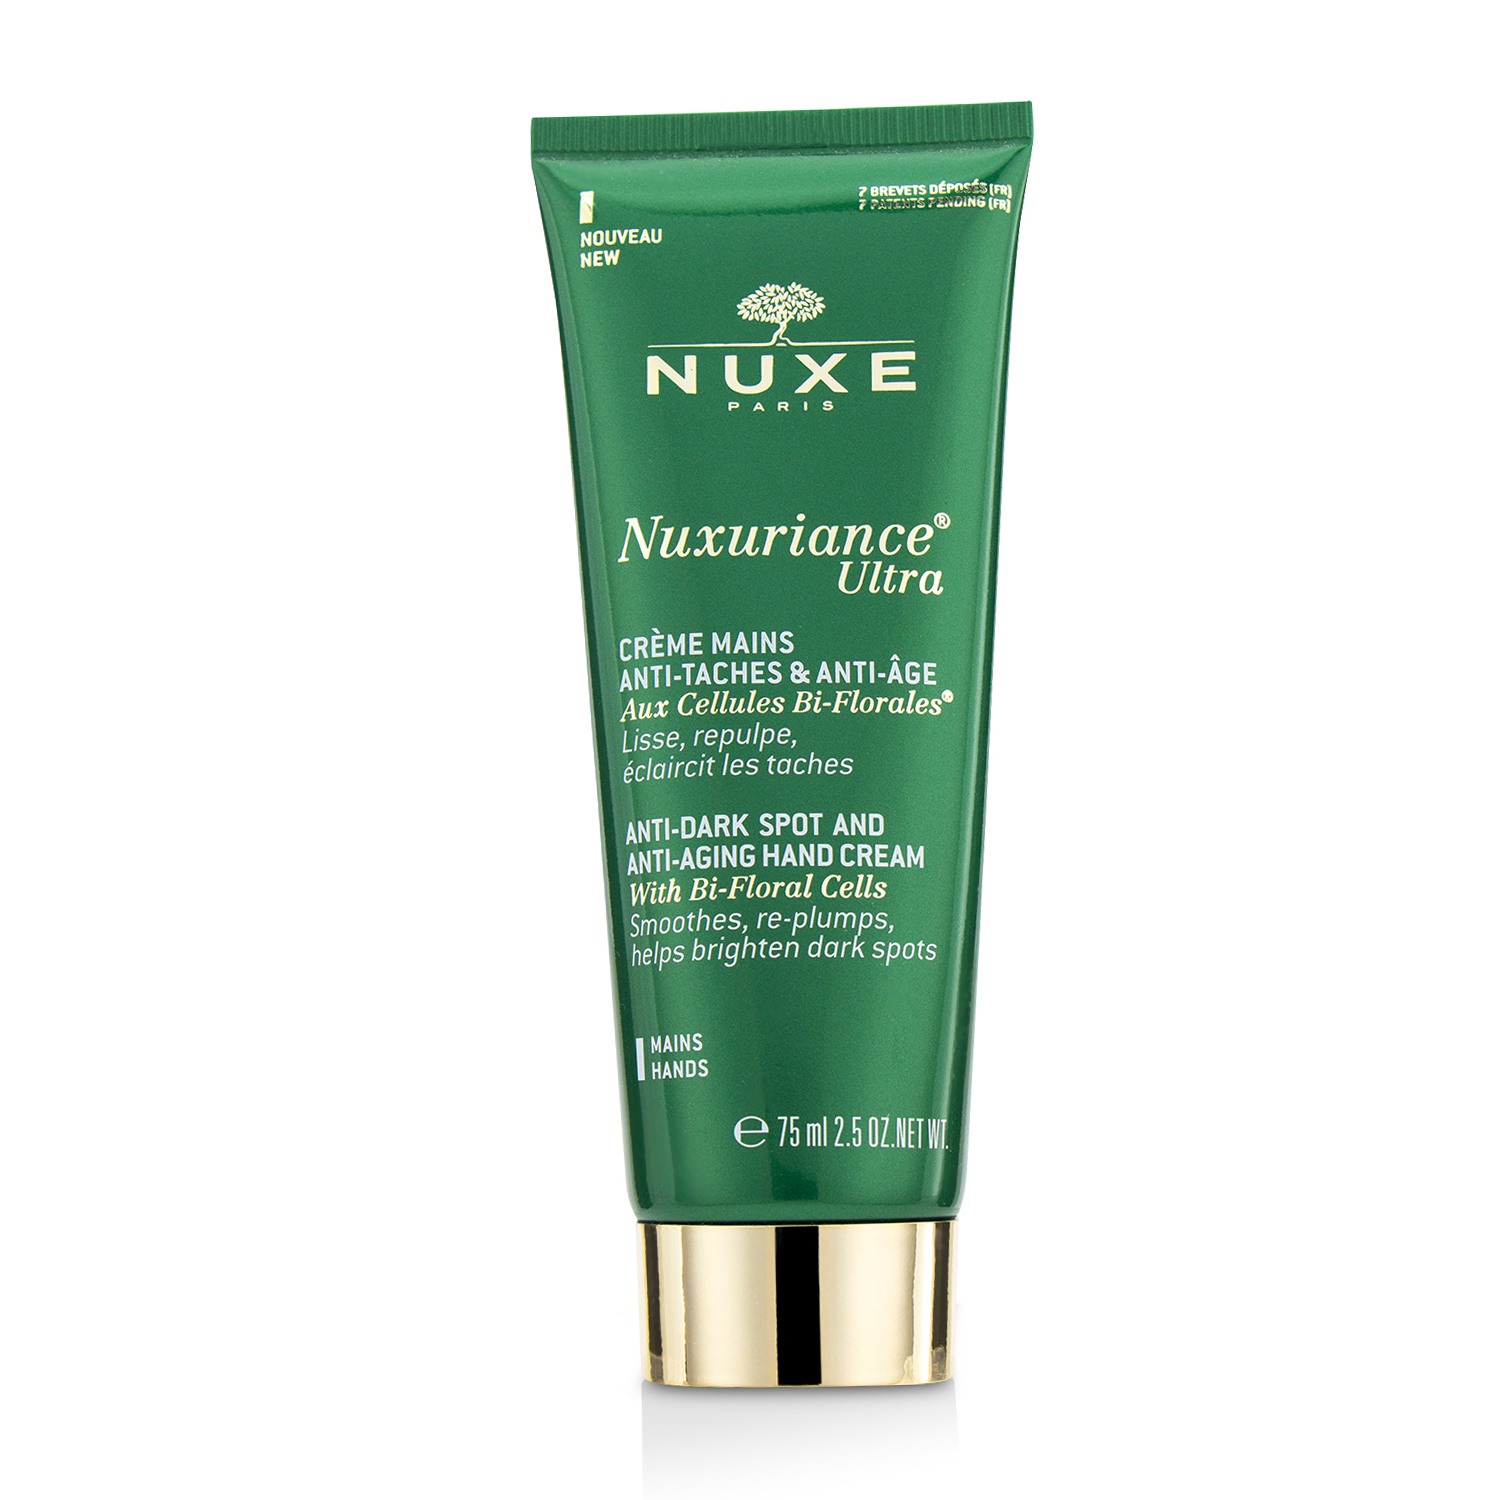 Nuxuriance Ultra Anti-Aging Hand Cream Nuxe Image